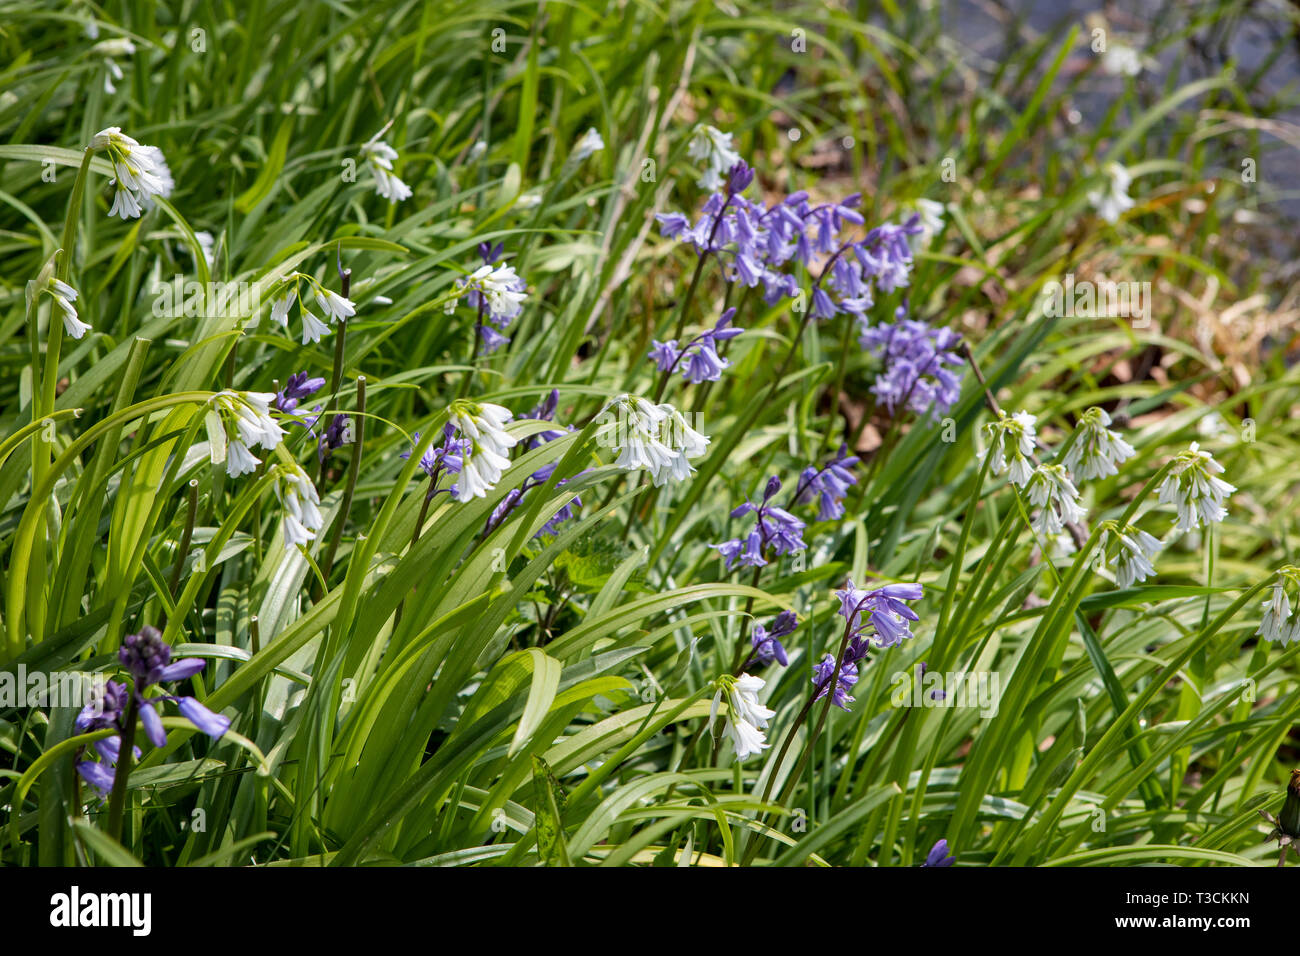 Bluebells (hyacinthoides non-scripta) and three-cornered garlic (allium triquetrum) growing by a riverside. Blue and white flowers, green leaves. Stock Photo